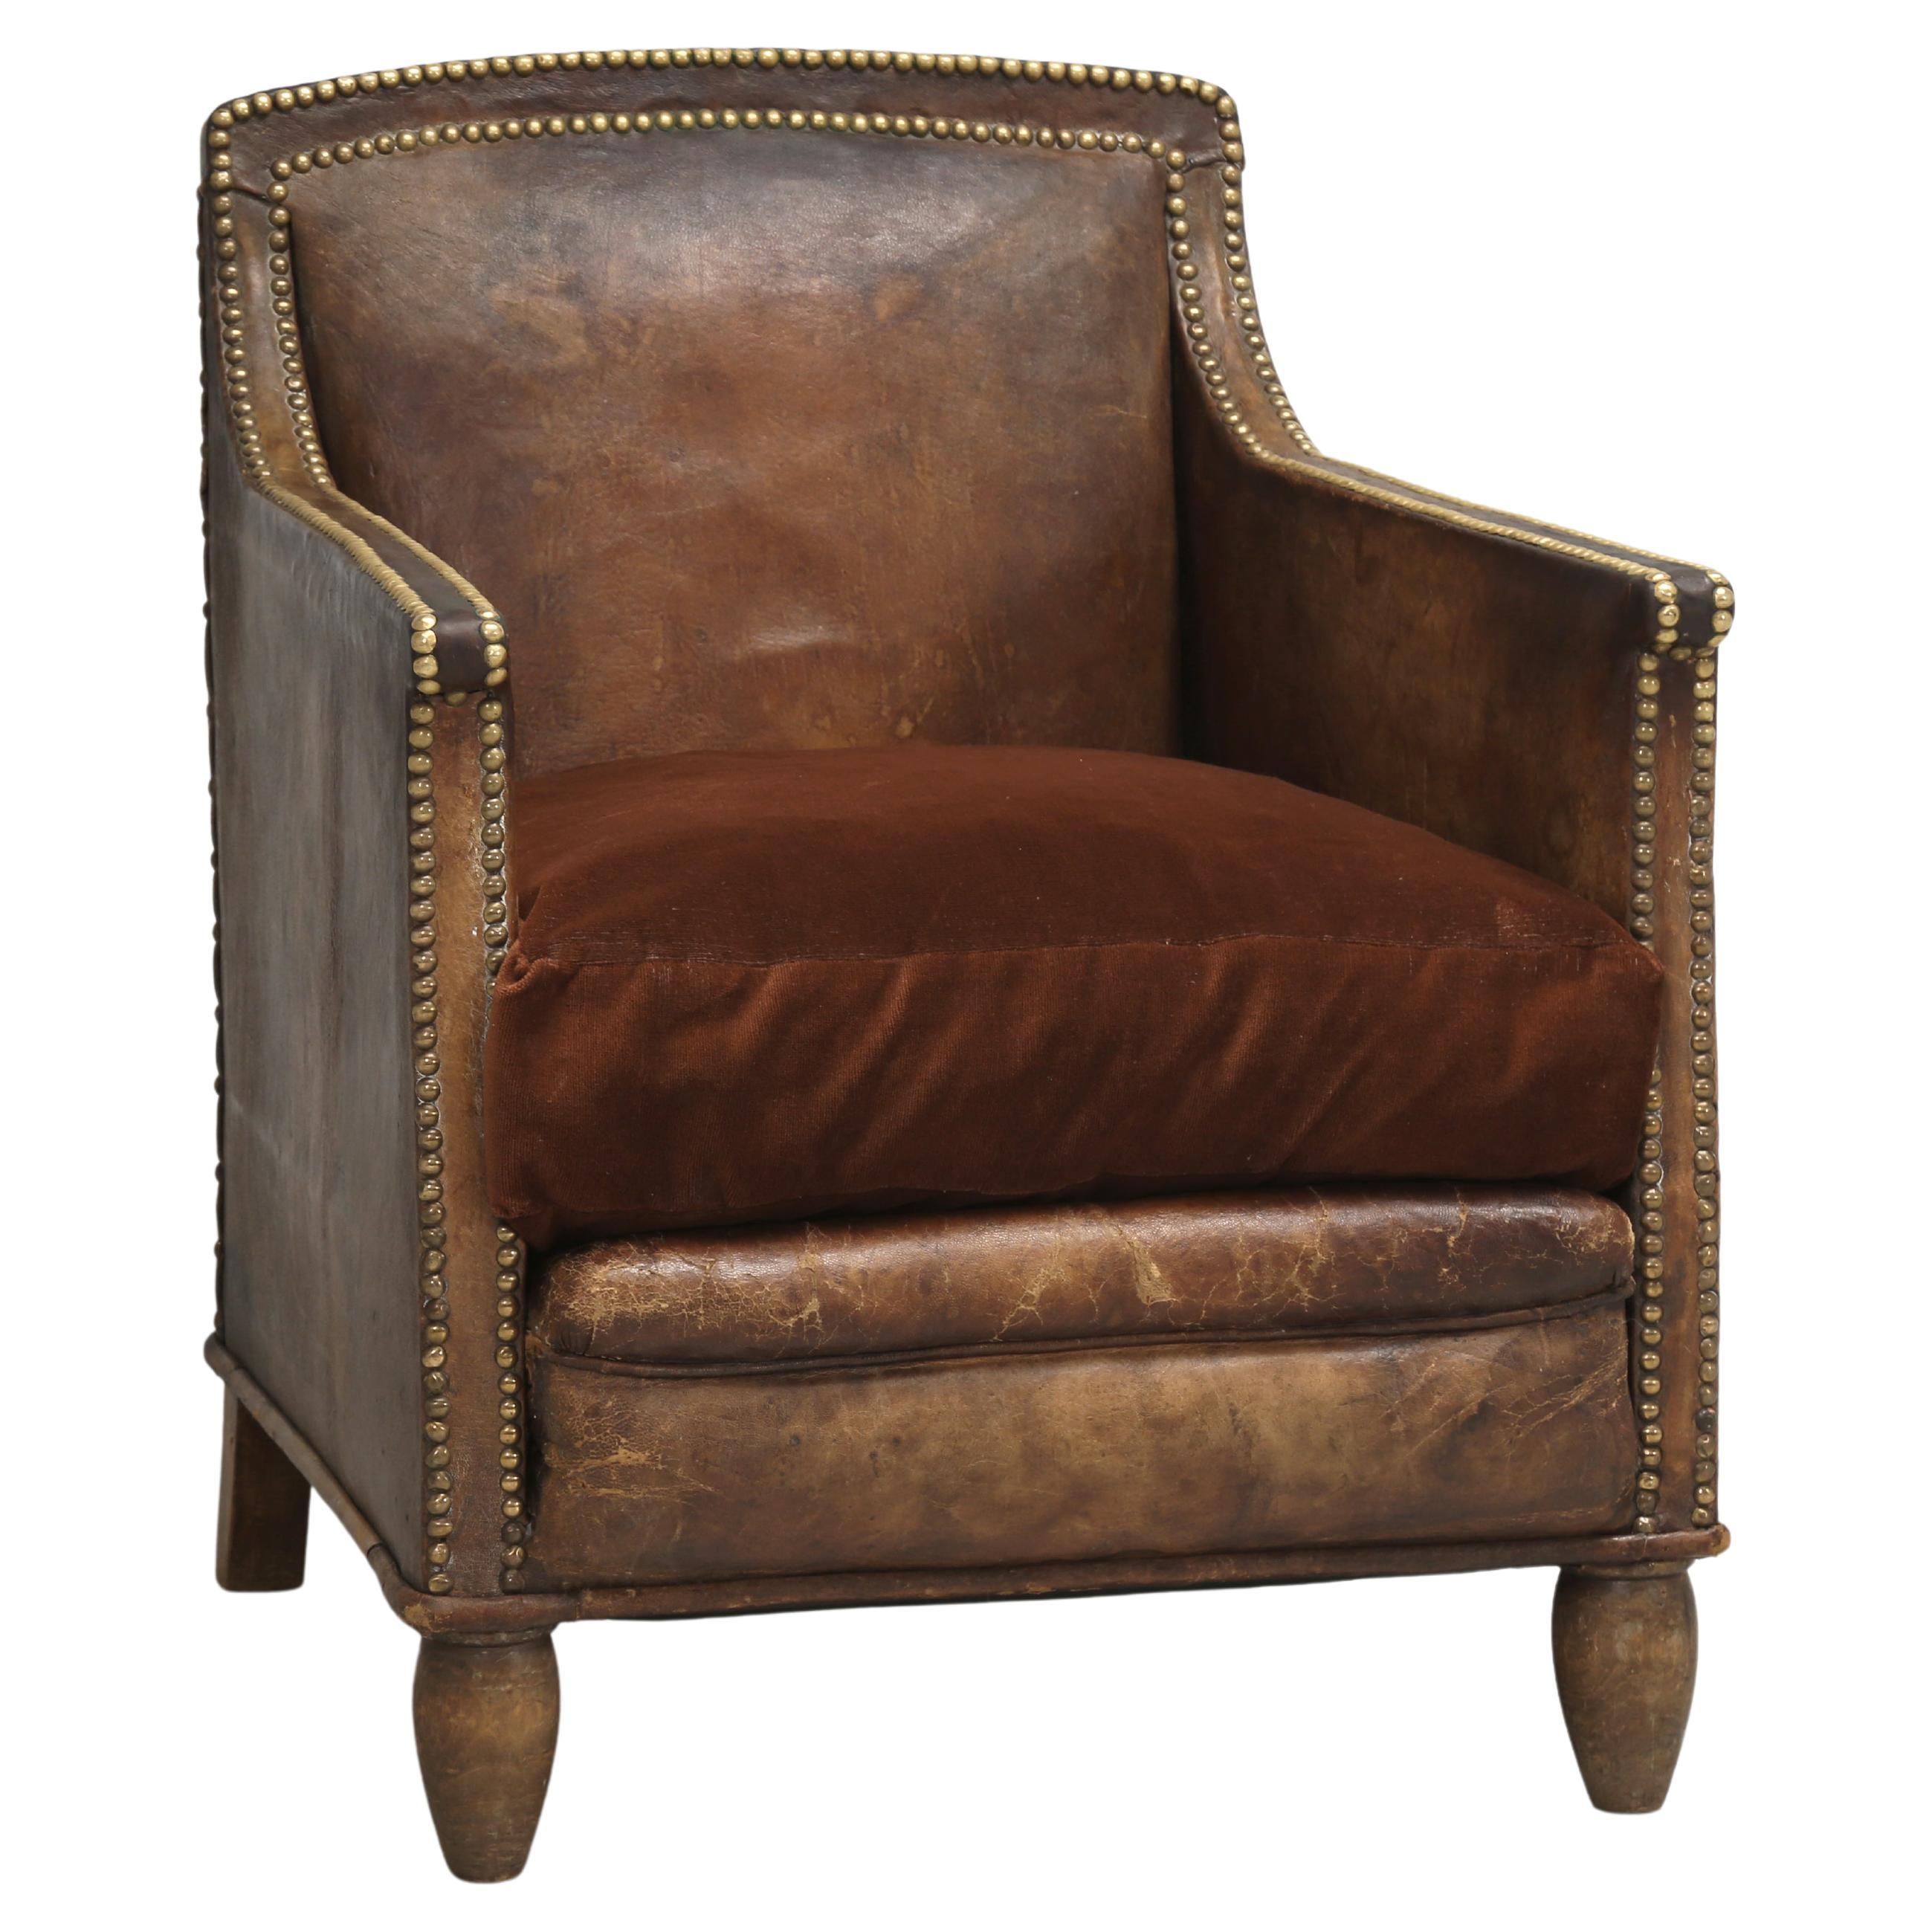 Antique French Club Chair in Original Leather Restored Internally c1920's